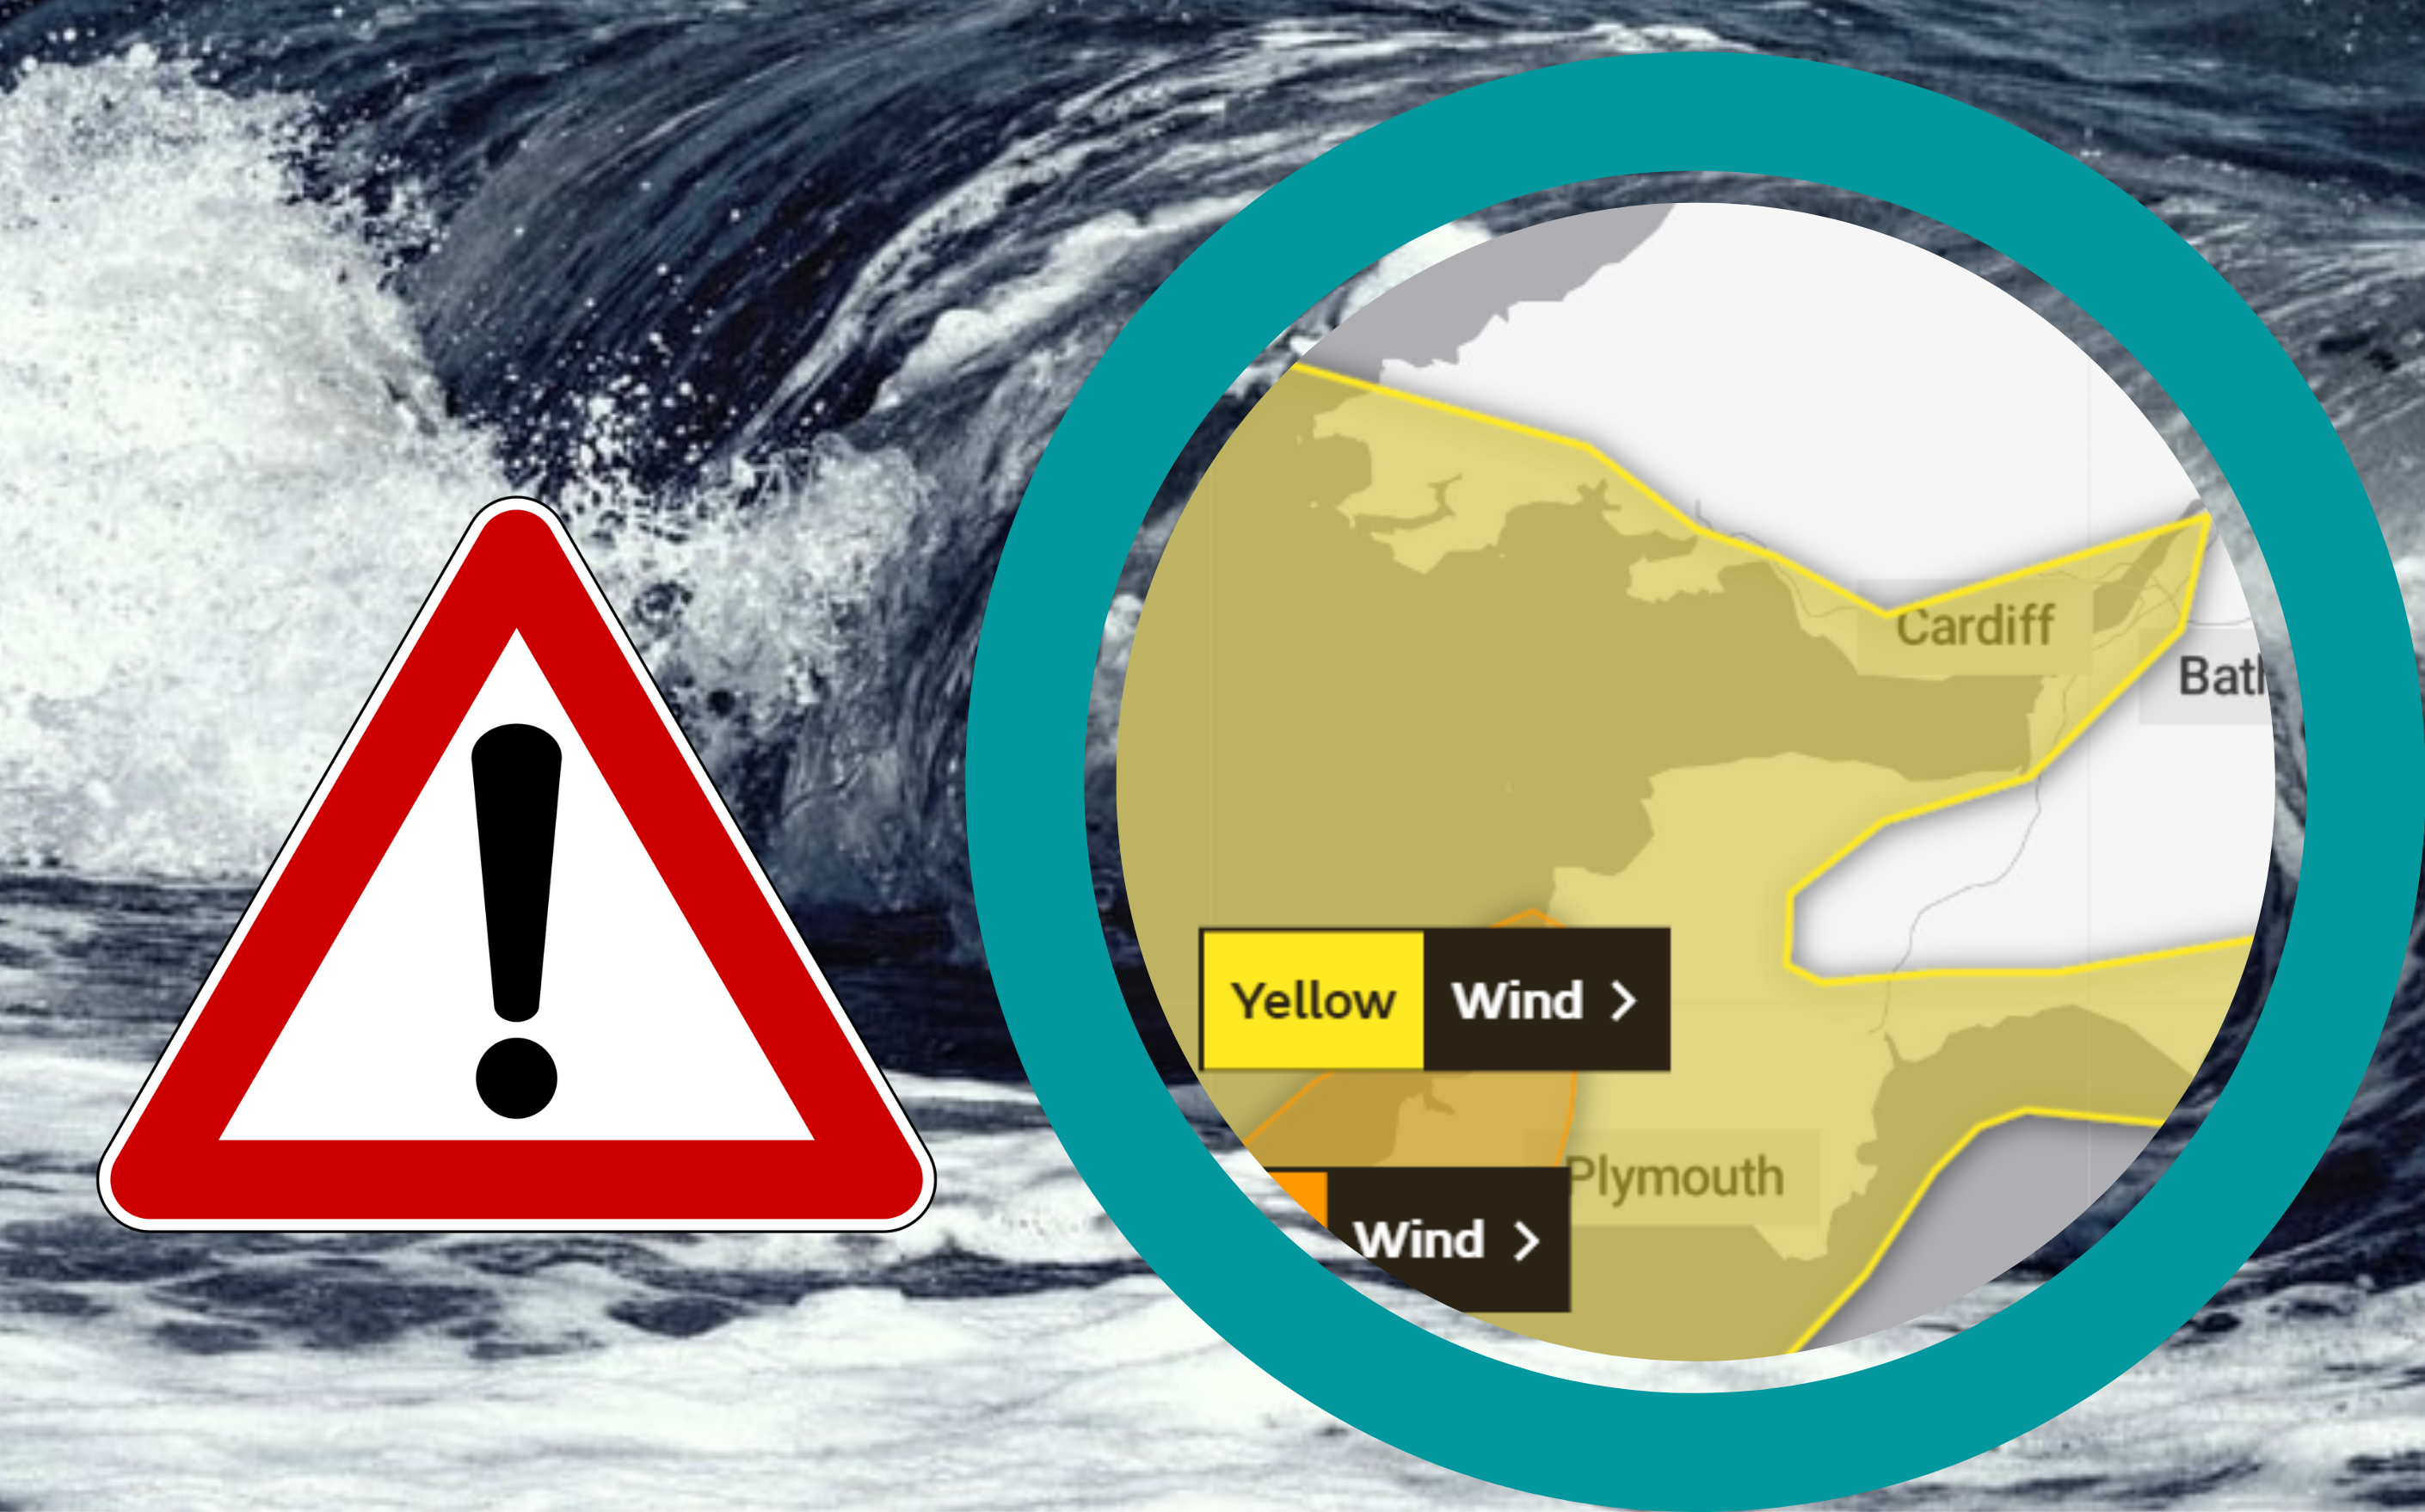 NEWS | Heading to Barry or Weston-Super-Mare in the next 48 hours? Beware – You might get blown away by Storm Evert